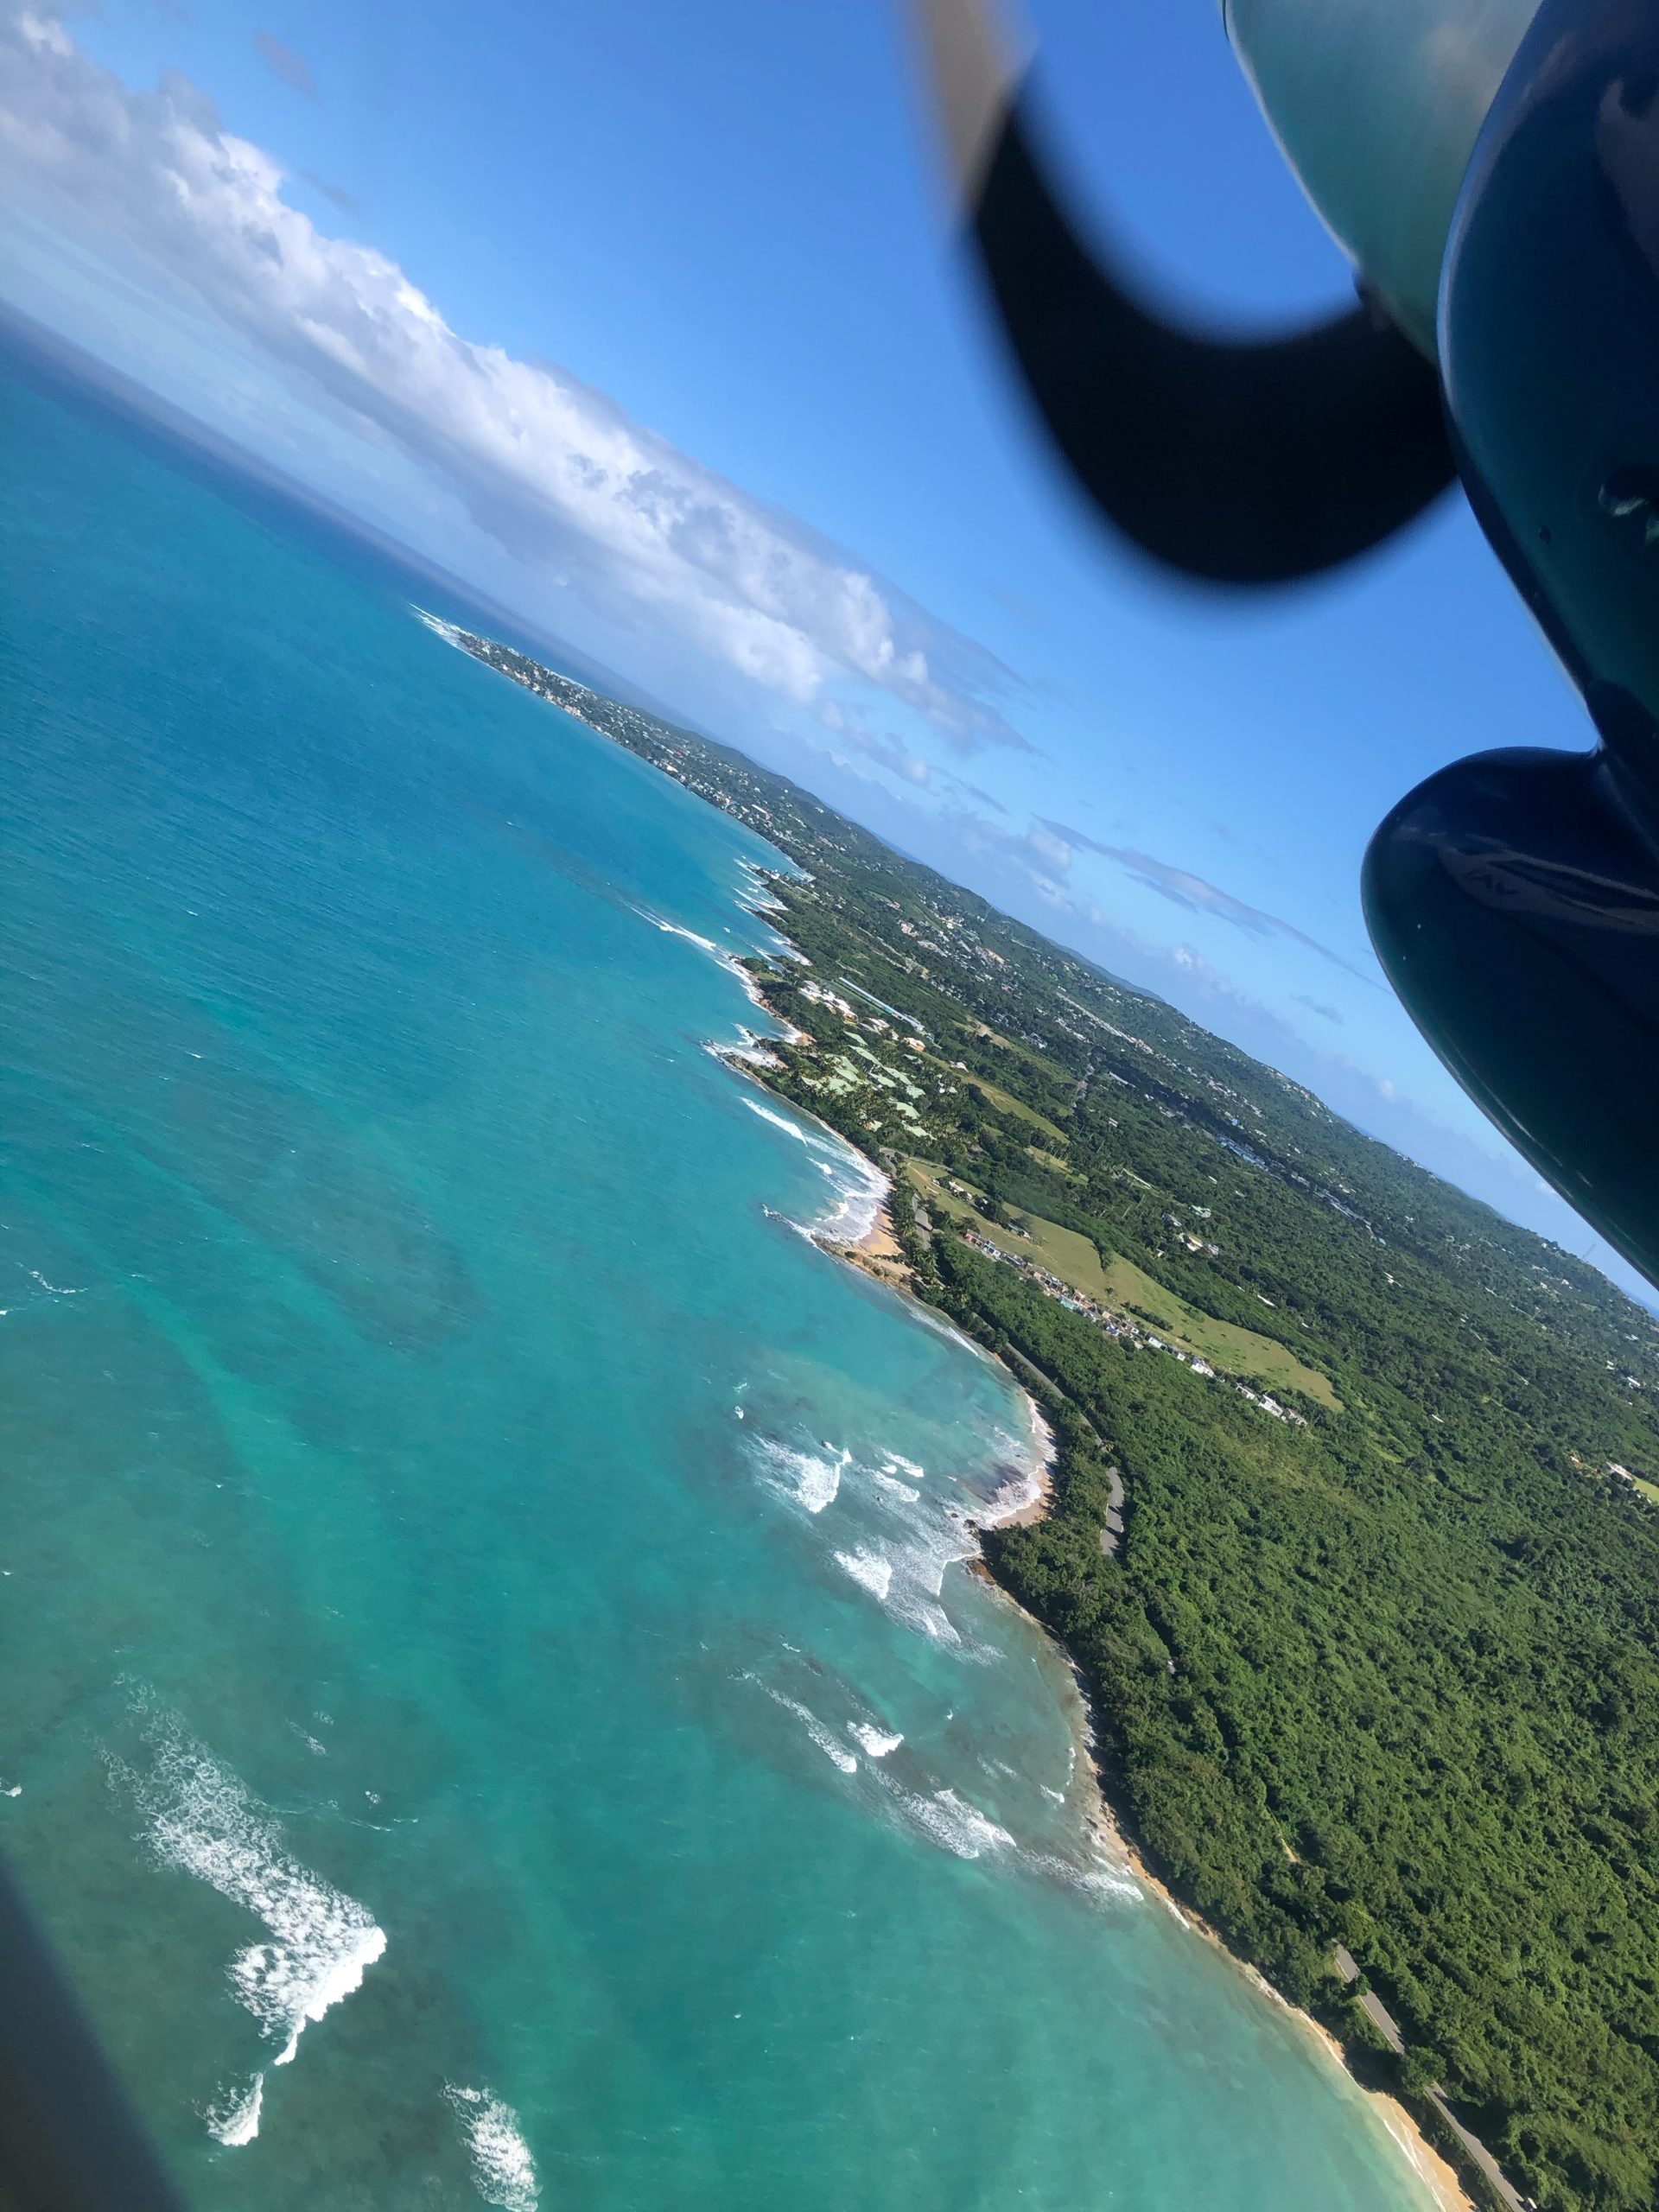 Jungle Tree Casa Escape The view of both Puerto Rico’s main island and Vieques from the short flight is breathtaking for those not afraid of heights